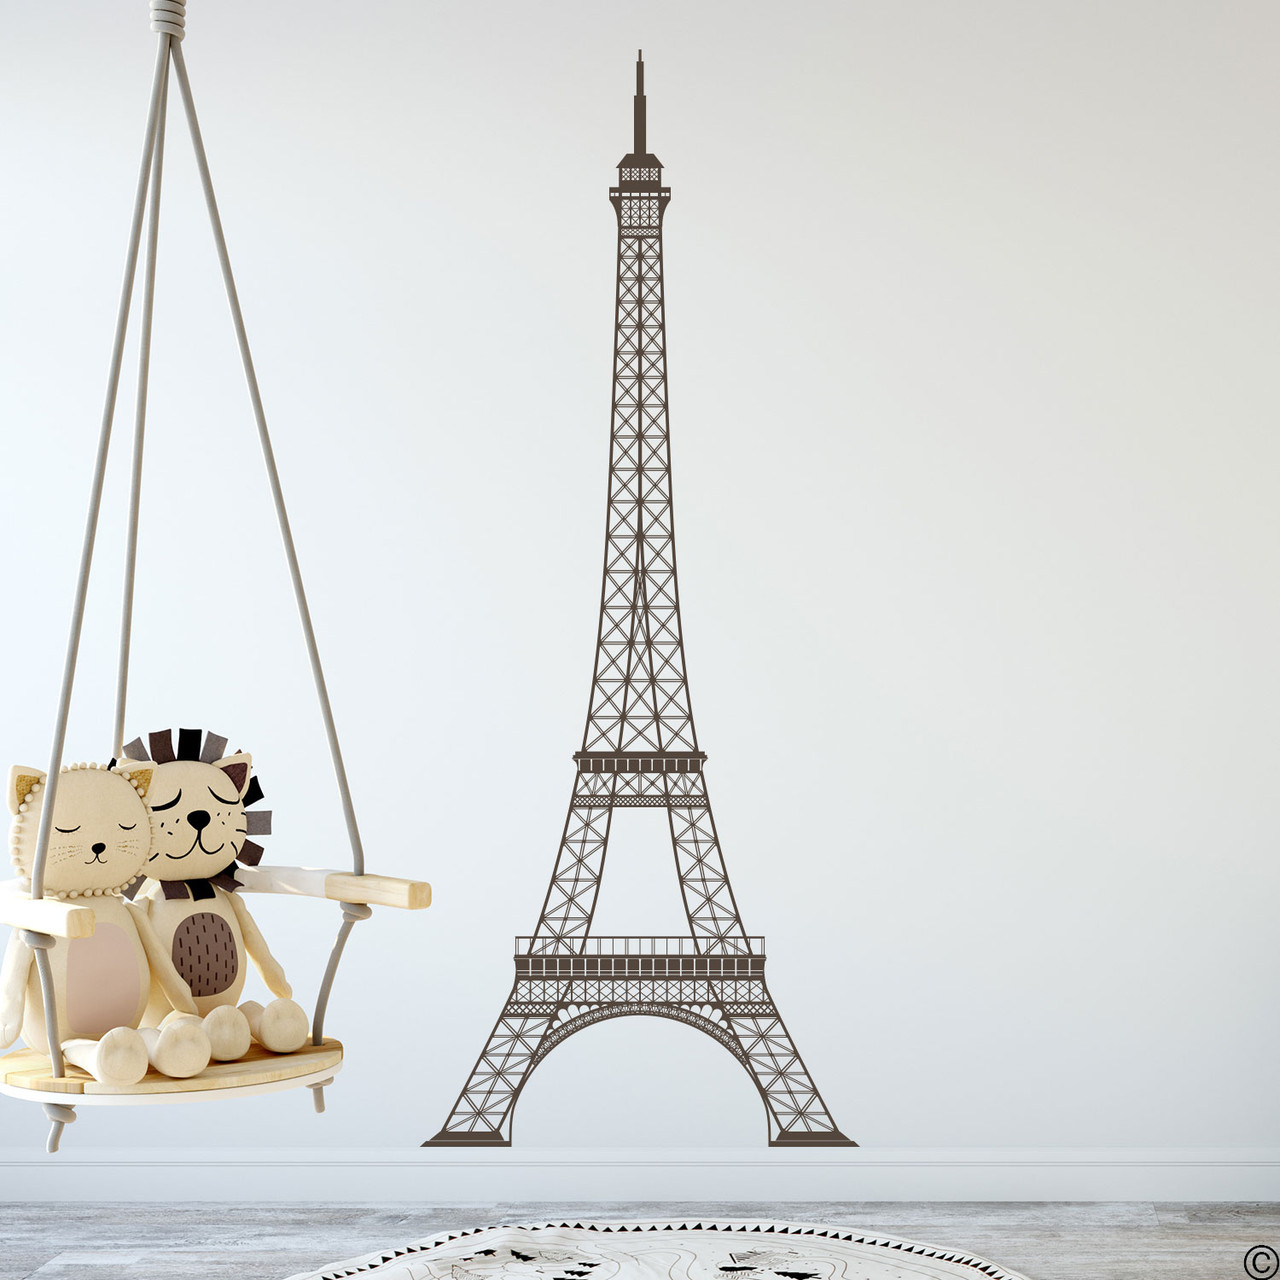 The Eiffel Tower wall decal shown here in brown color on an interior playroom wall.